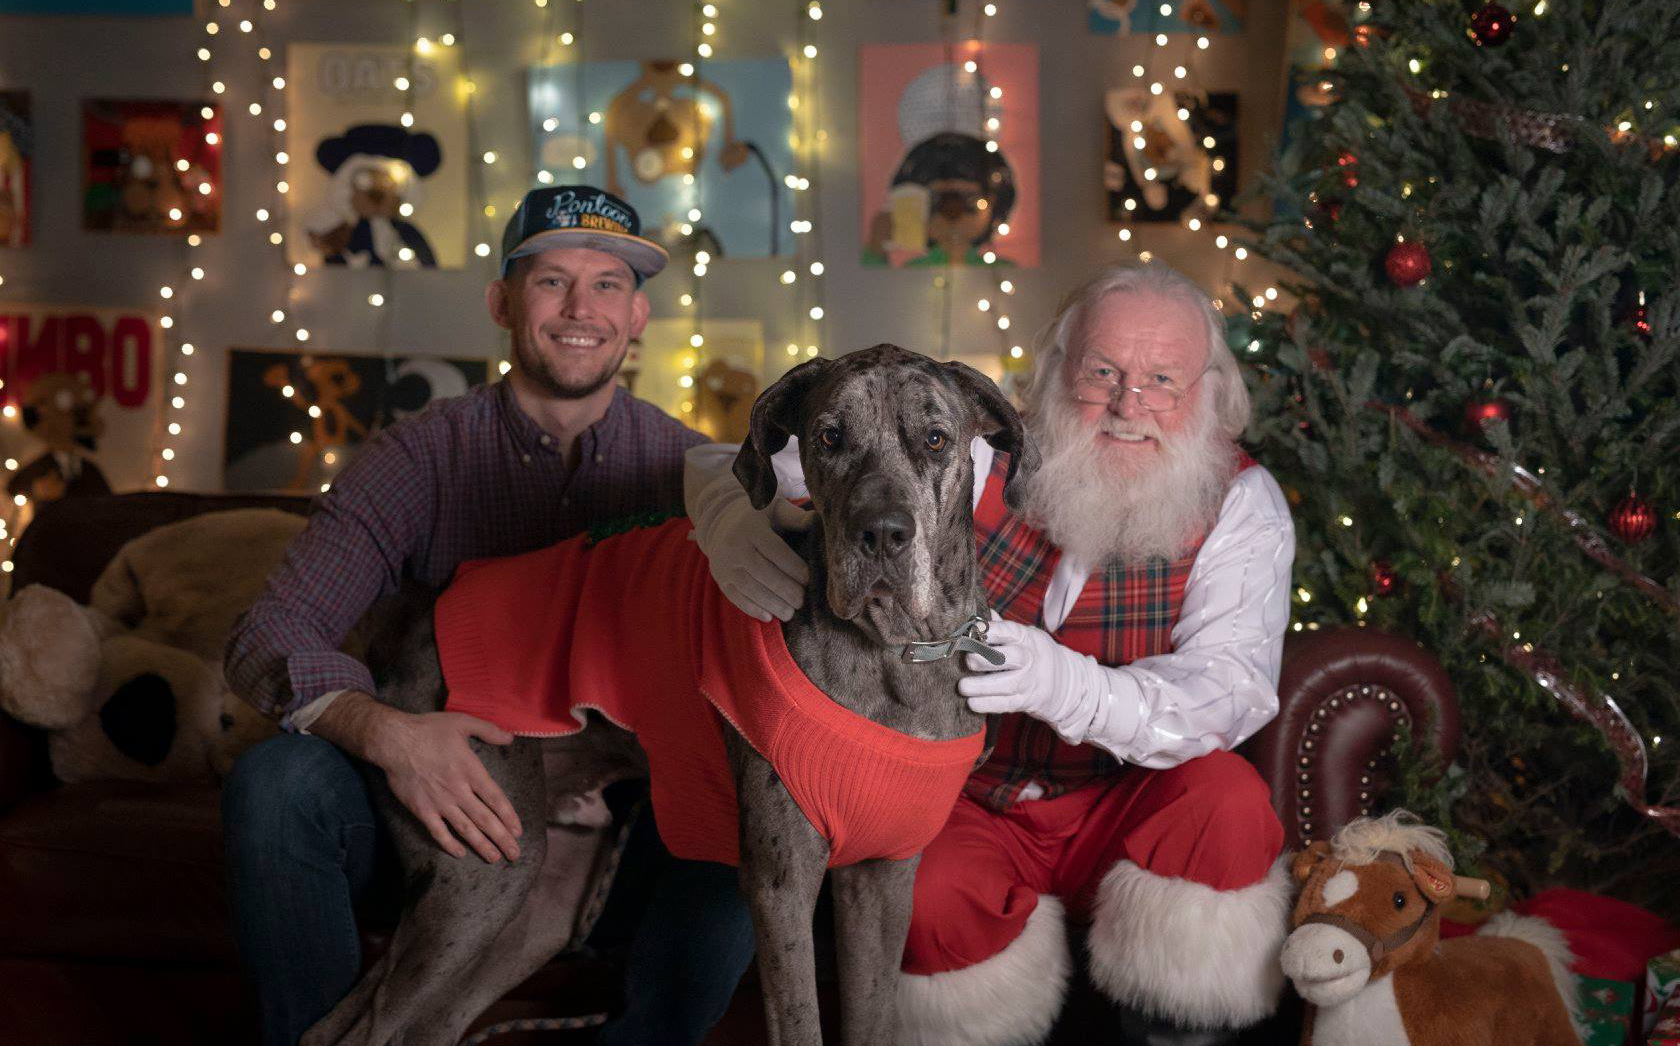 Santa, a great dane and the dog's owner posing for a photo.